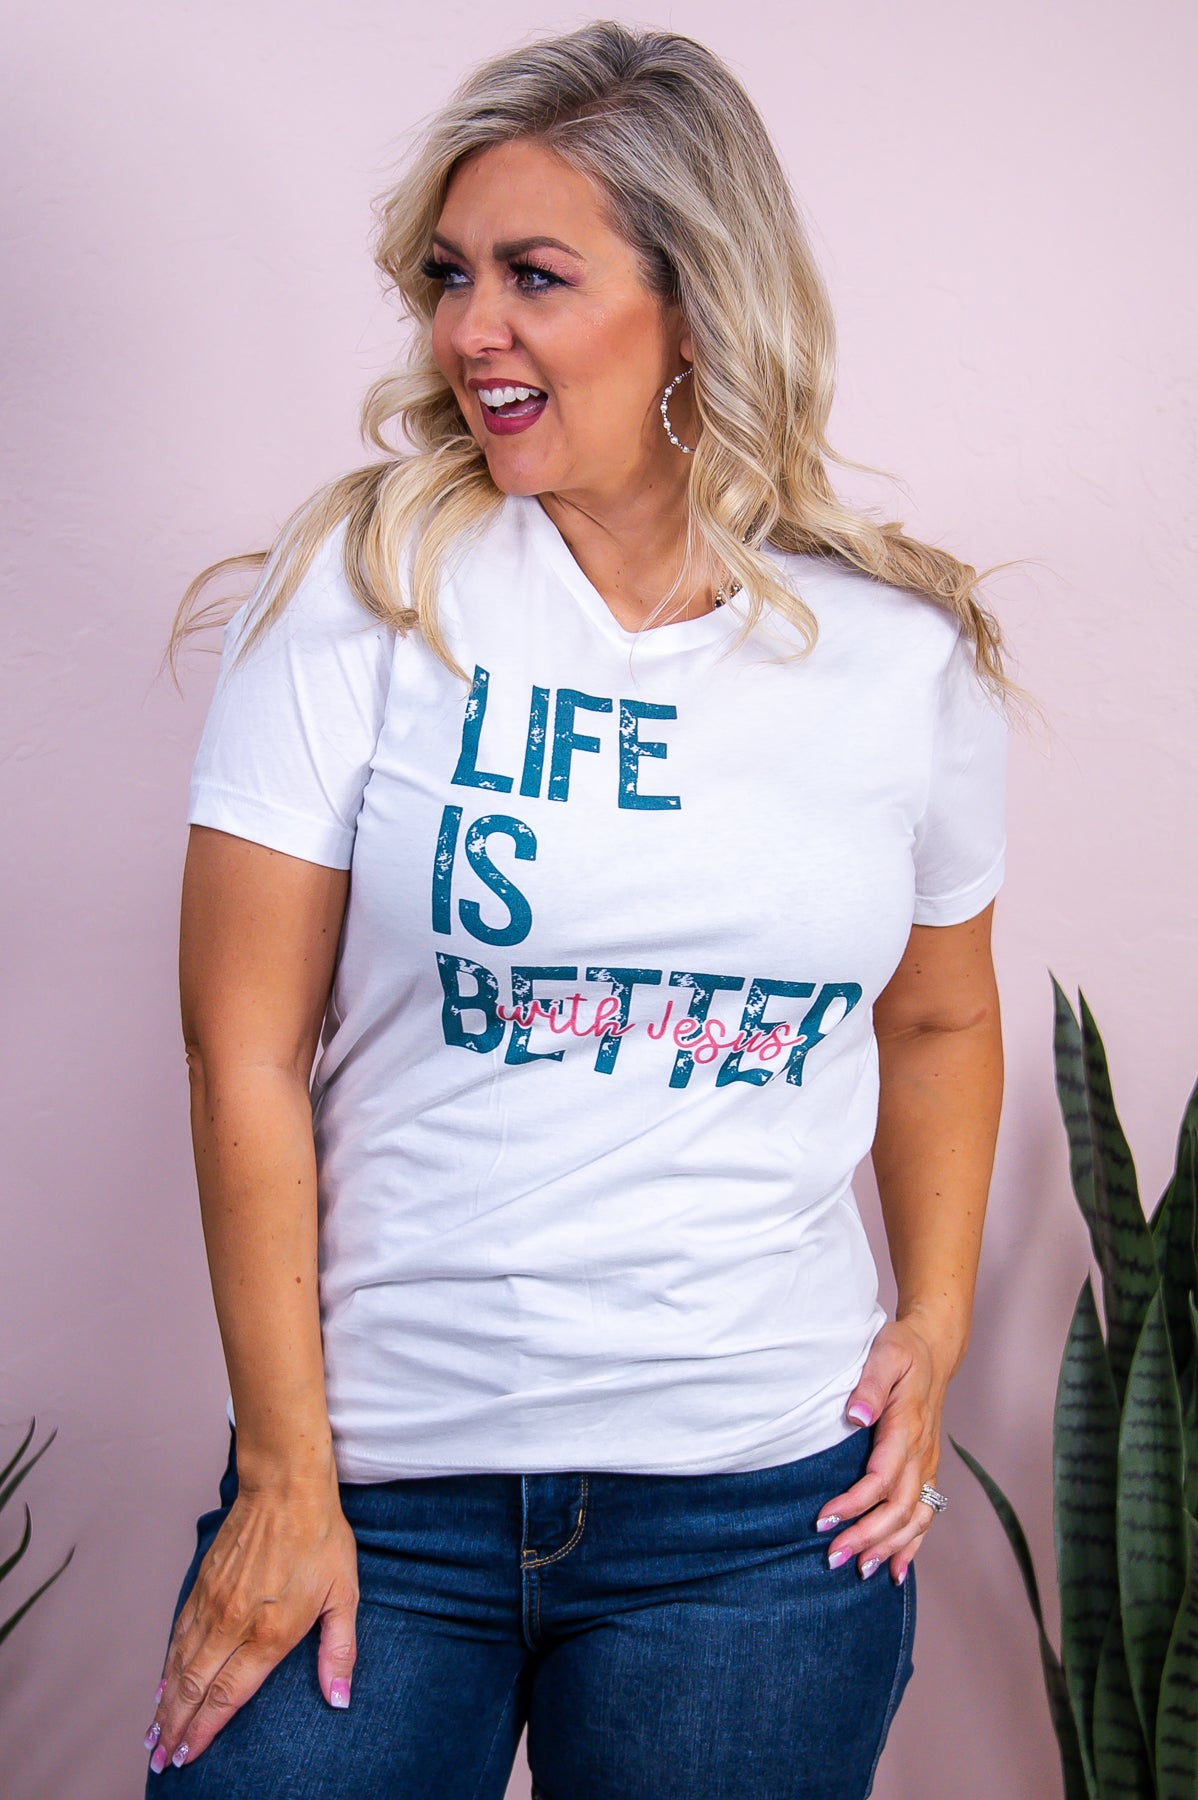 Life Is Better With Jesus White Graphic Tee - A3488WH